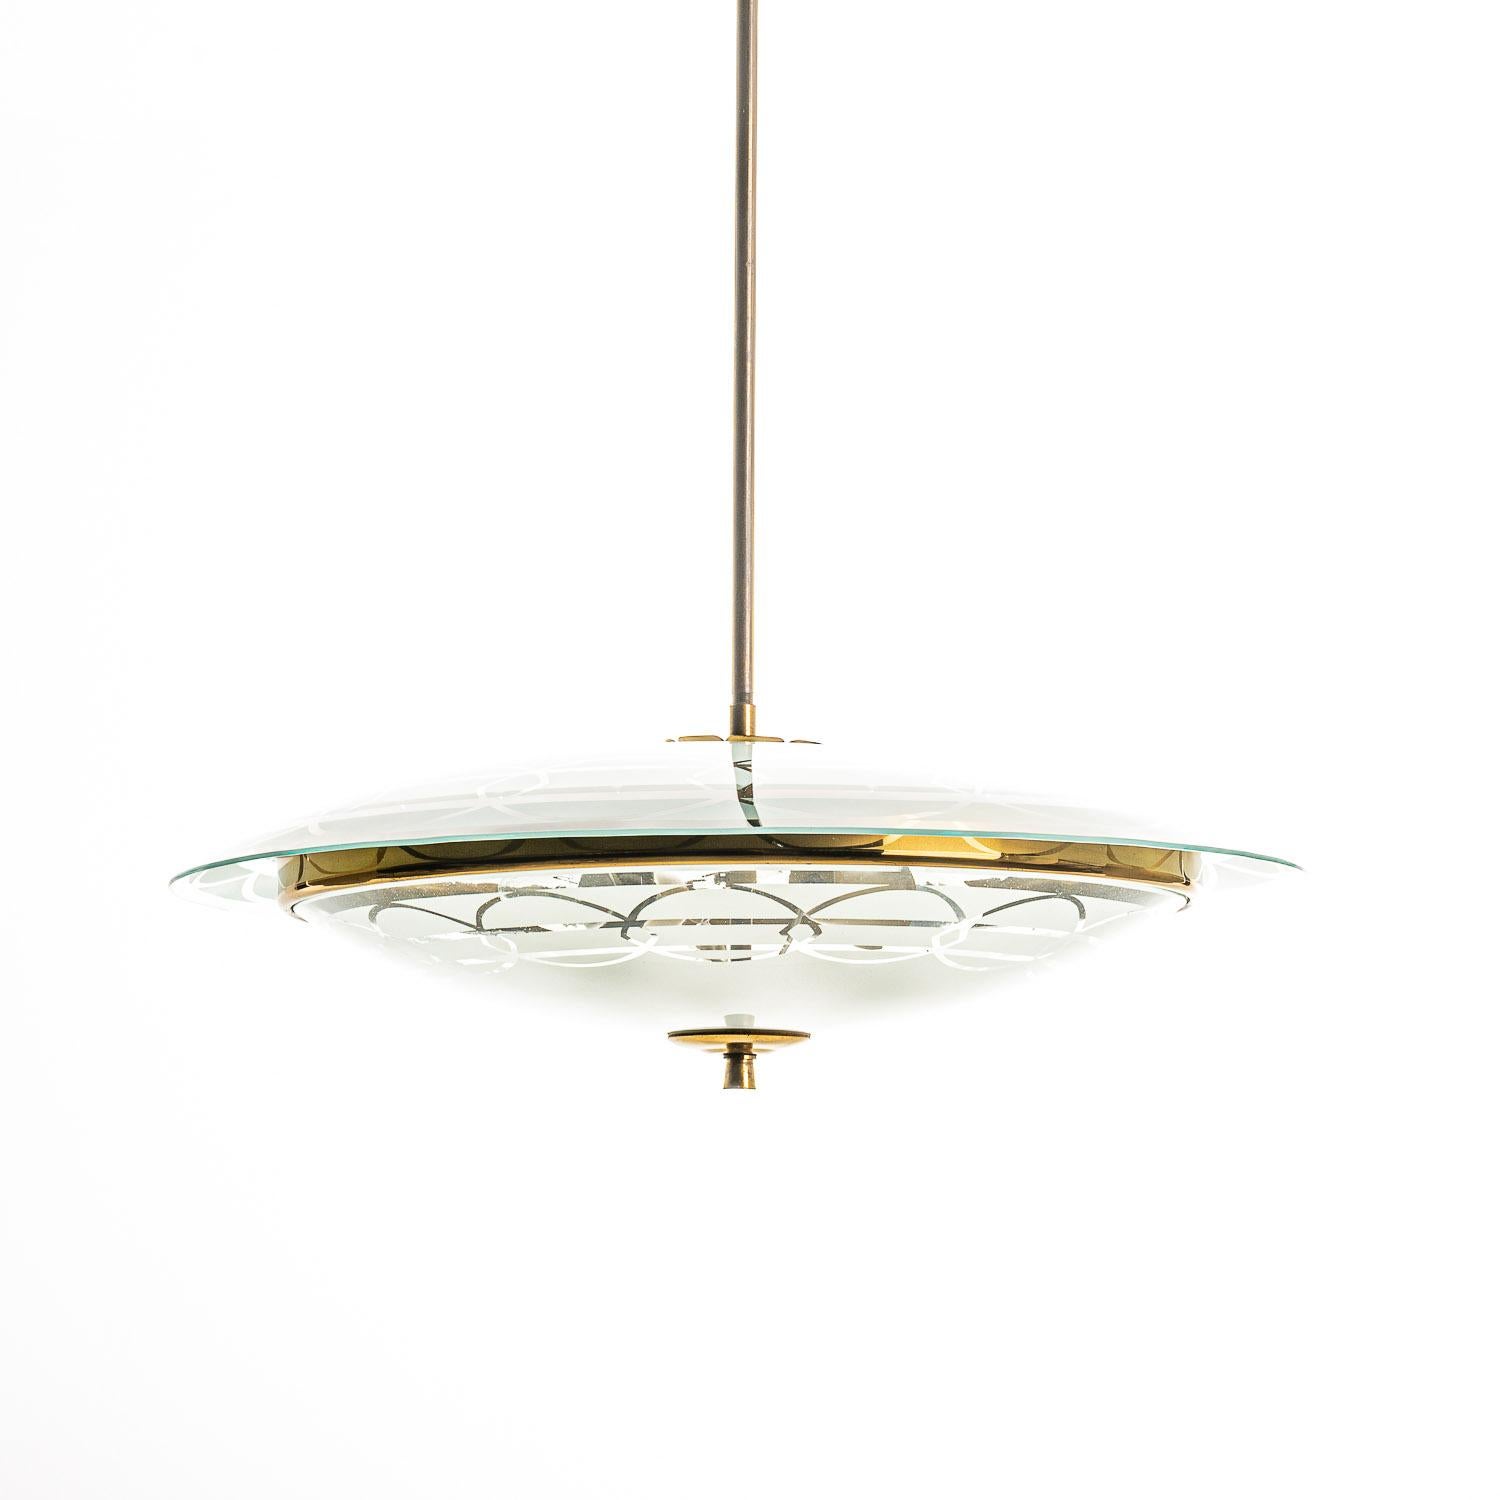 This elegant light consisting of a brass frame and 2 unique glass reflector/saucers. 
The lower round curved glass reflector with mounts below a larger round etched & clear glass reflector. A beautiful decorated brass ring to connect the panels. In